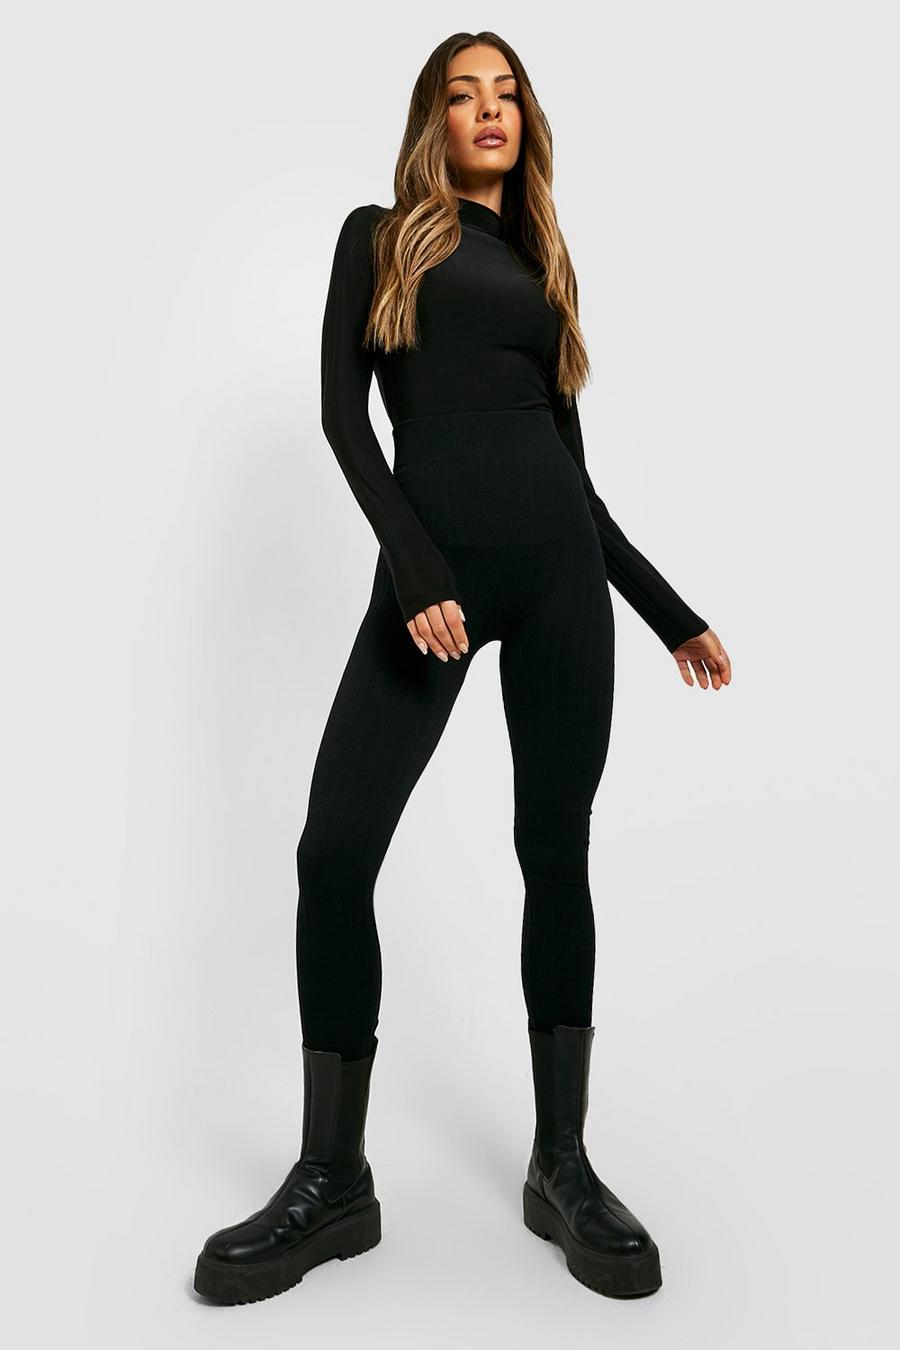 Black High Waisted Chain Knit Fleece Lined Leggings image number 1